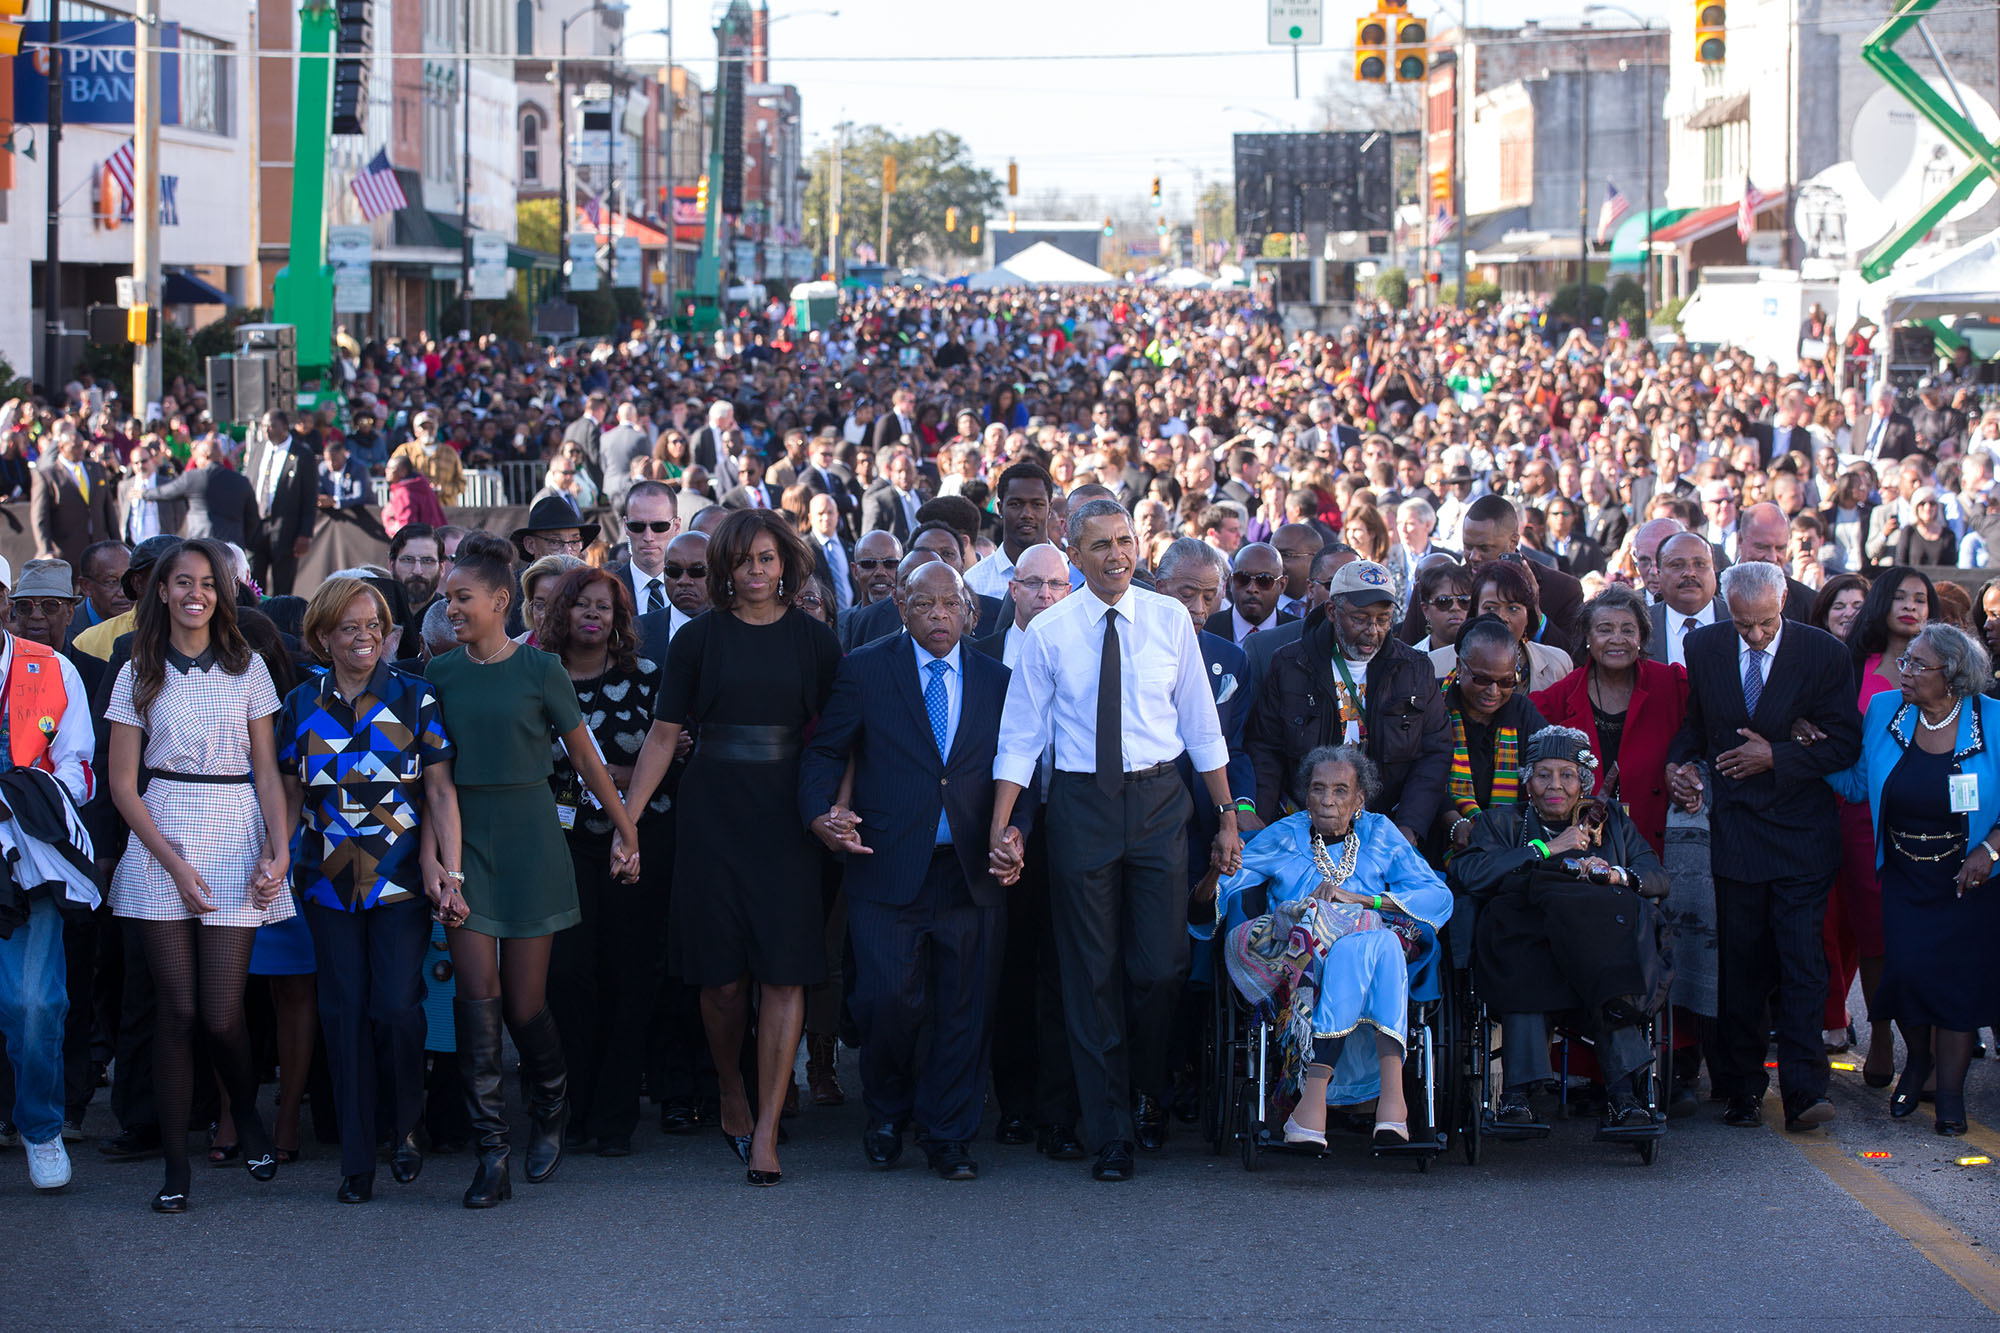 The Obama family marches together in Selma, Alabama.